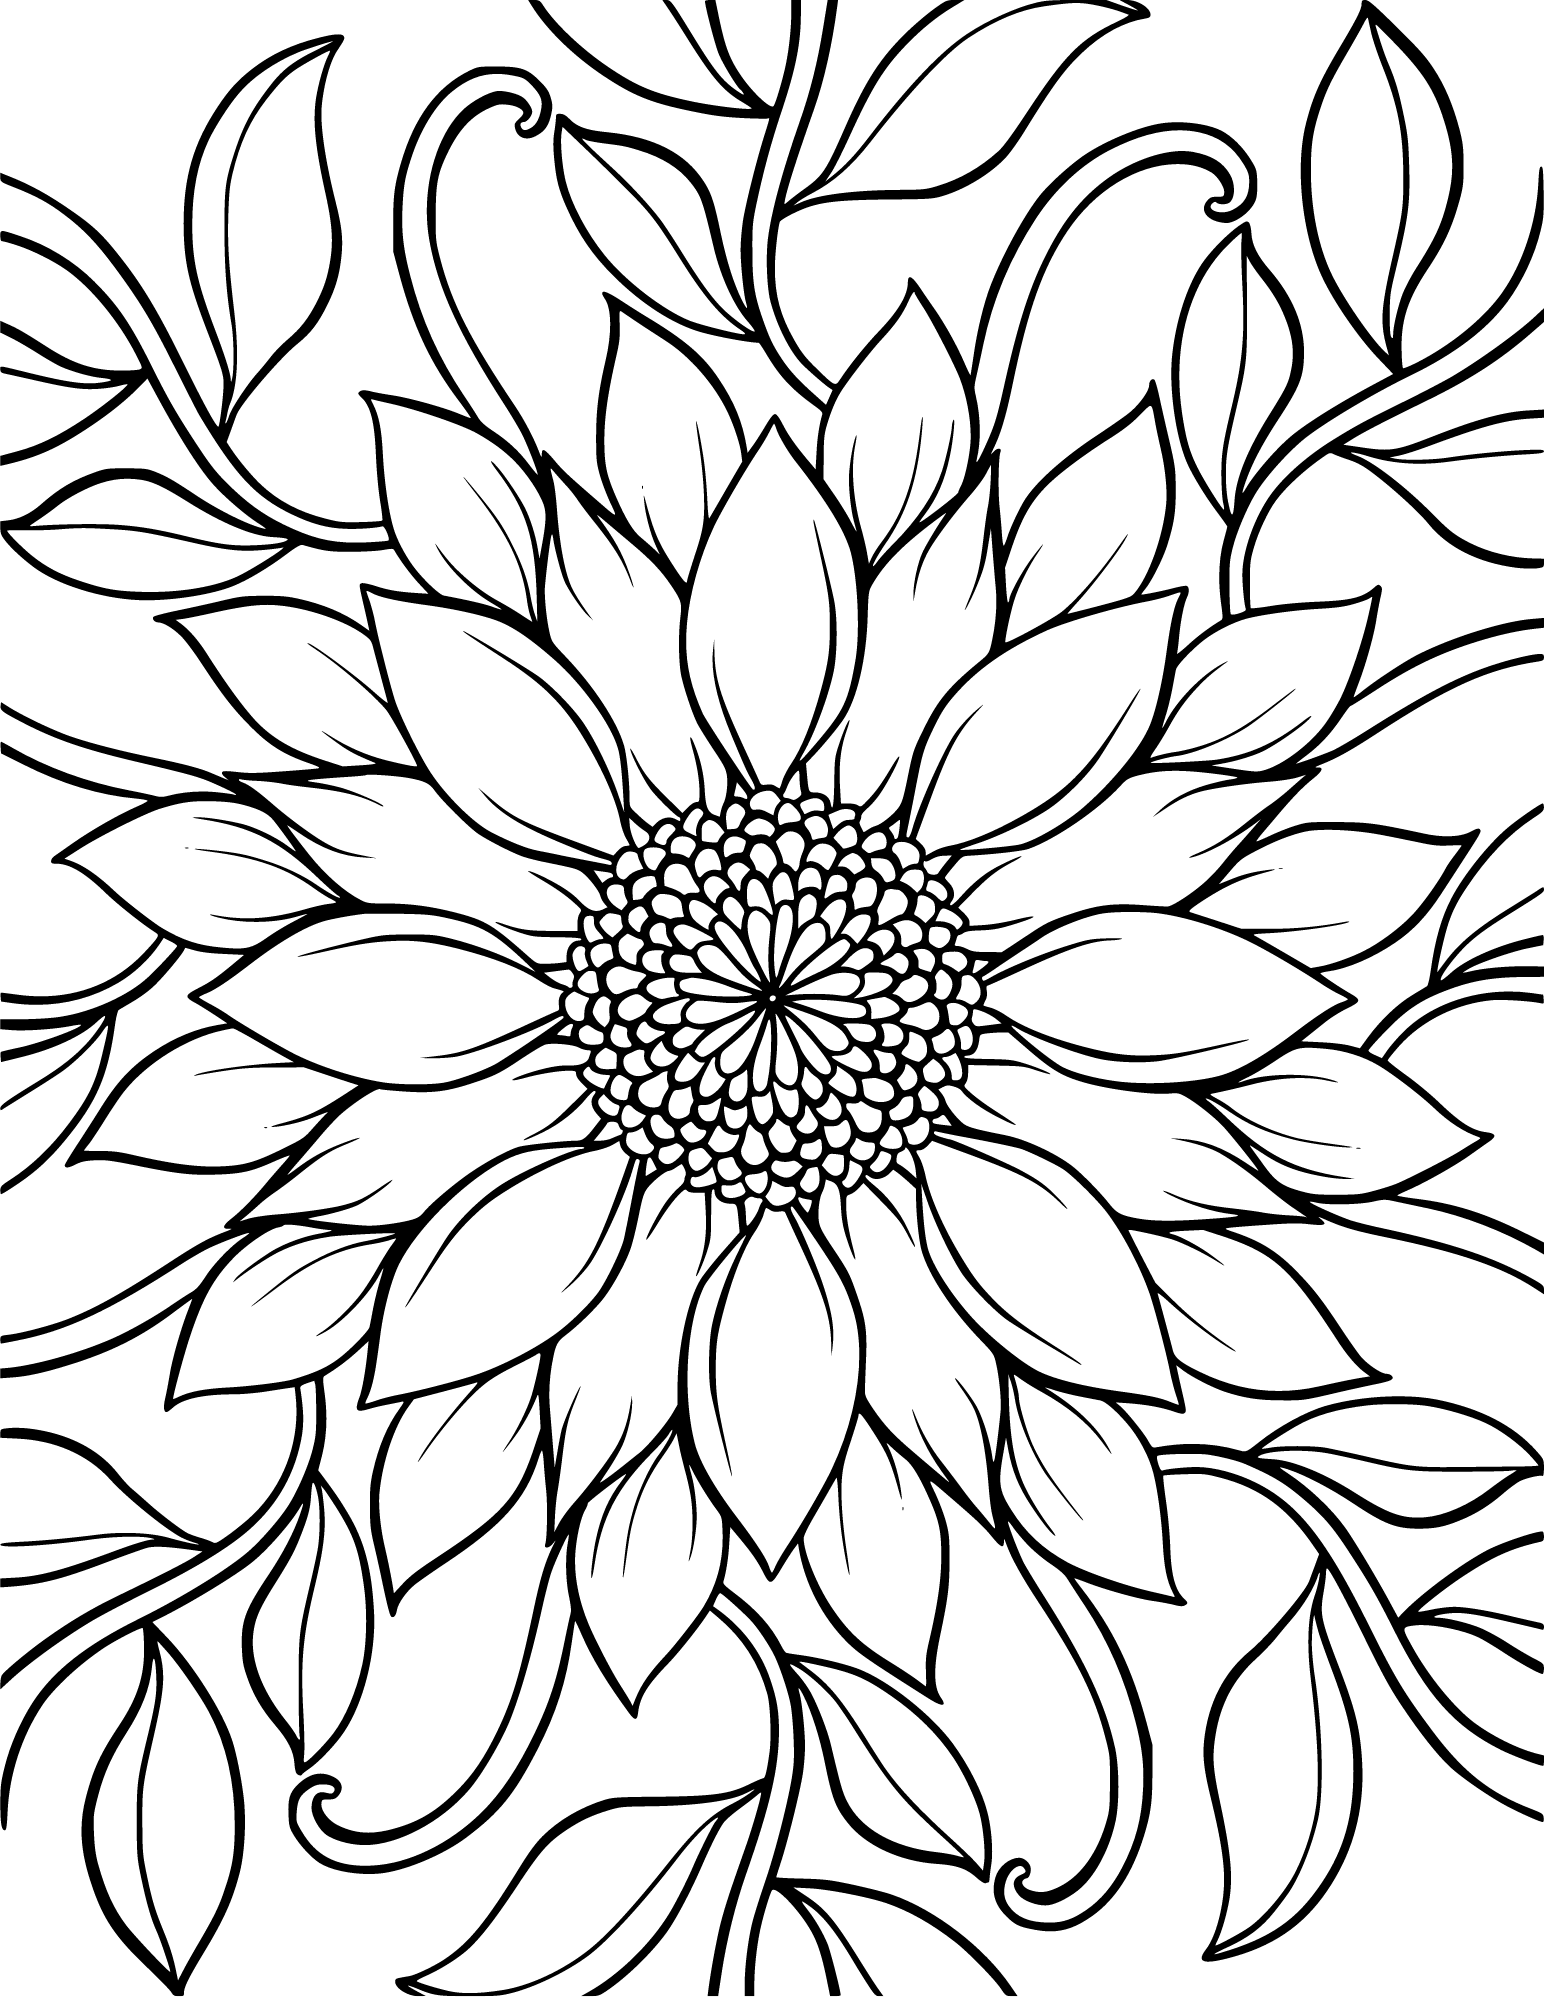 Zentangle Flower full coloring page